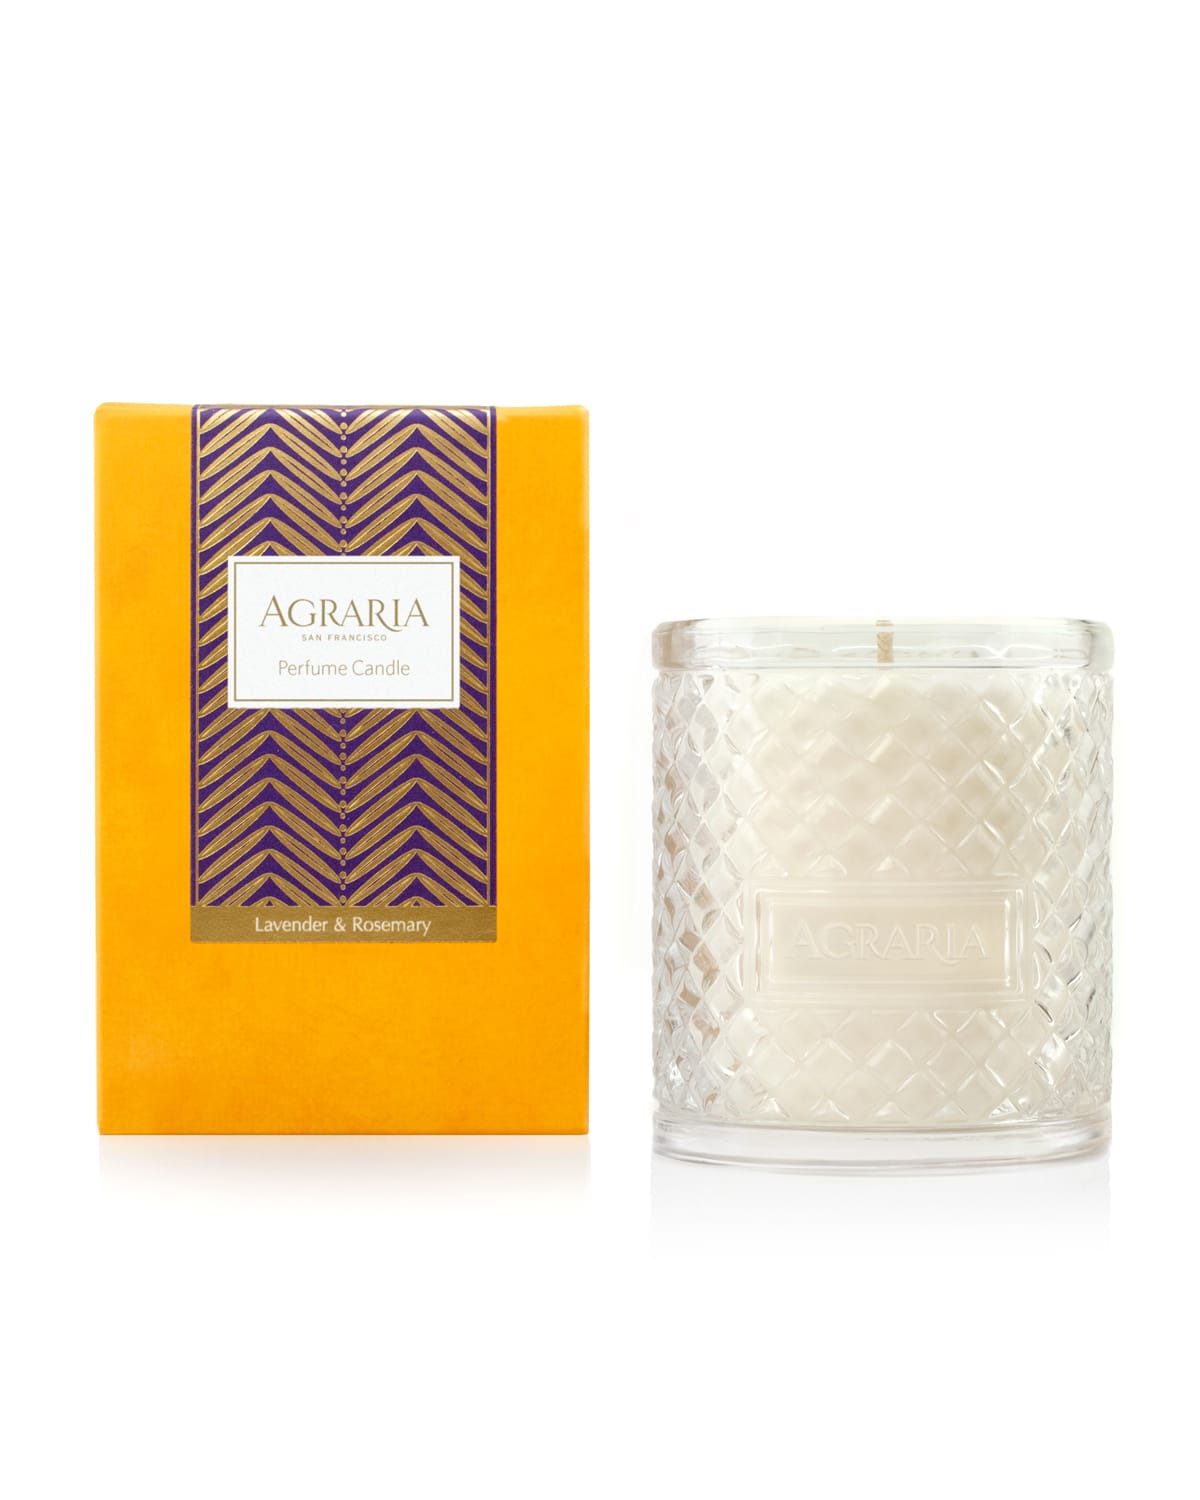 Agraria Lavender & Rosemary Woven Crystal Perfume Candle, 7 Oz. In Gold